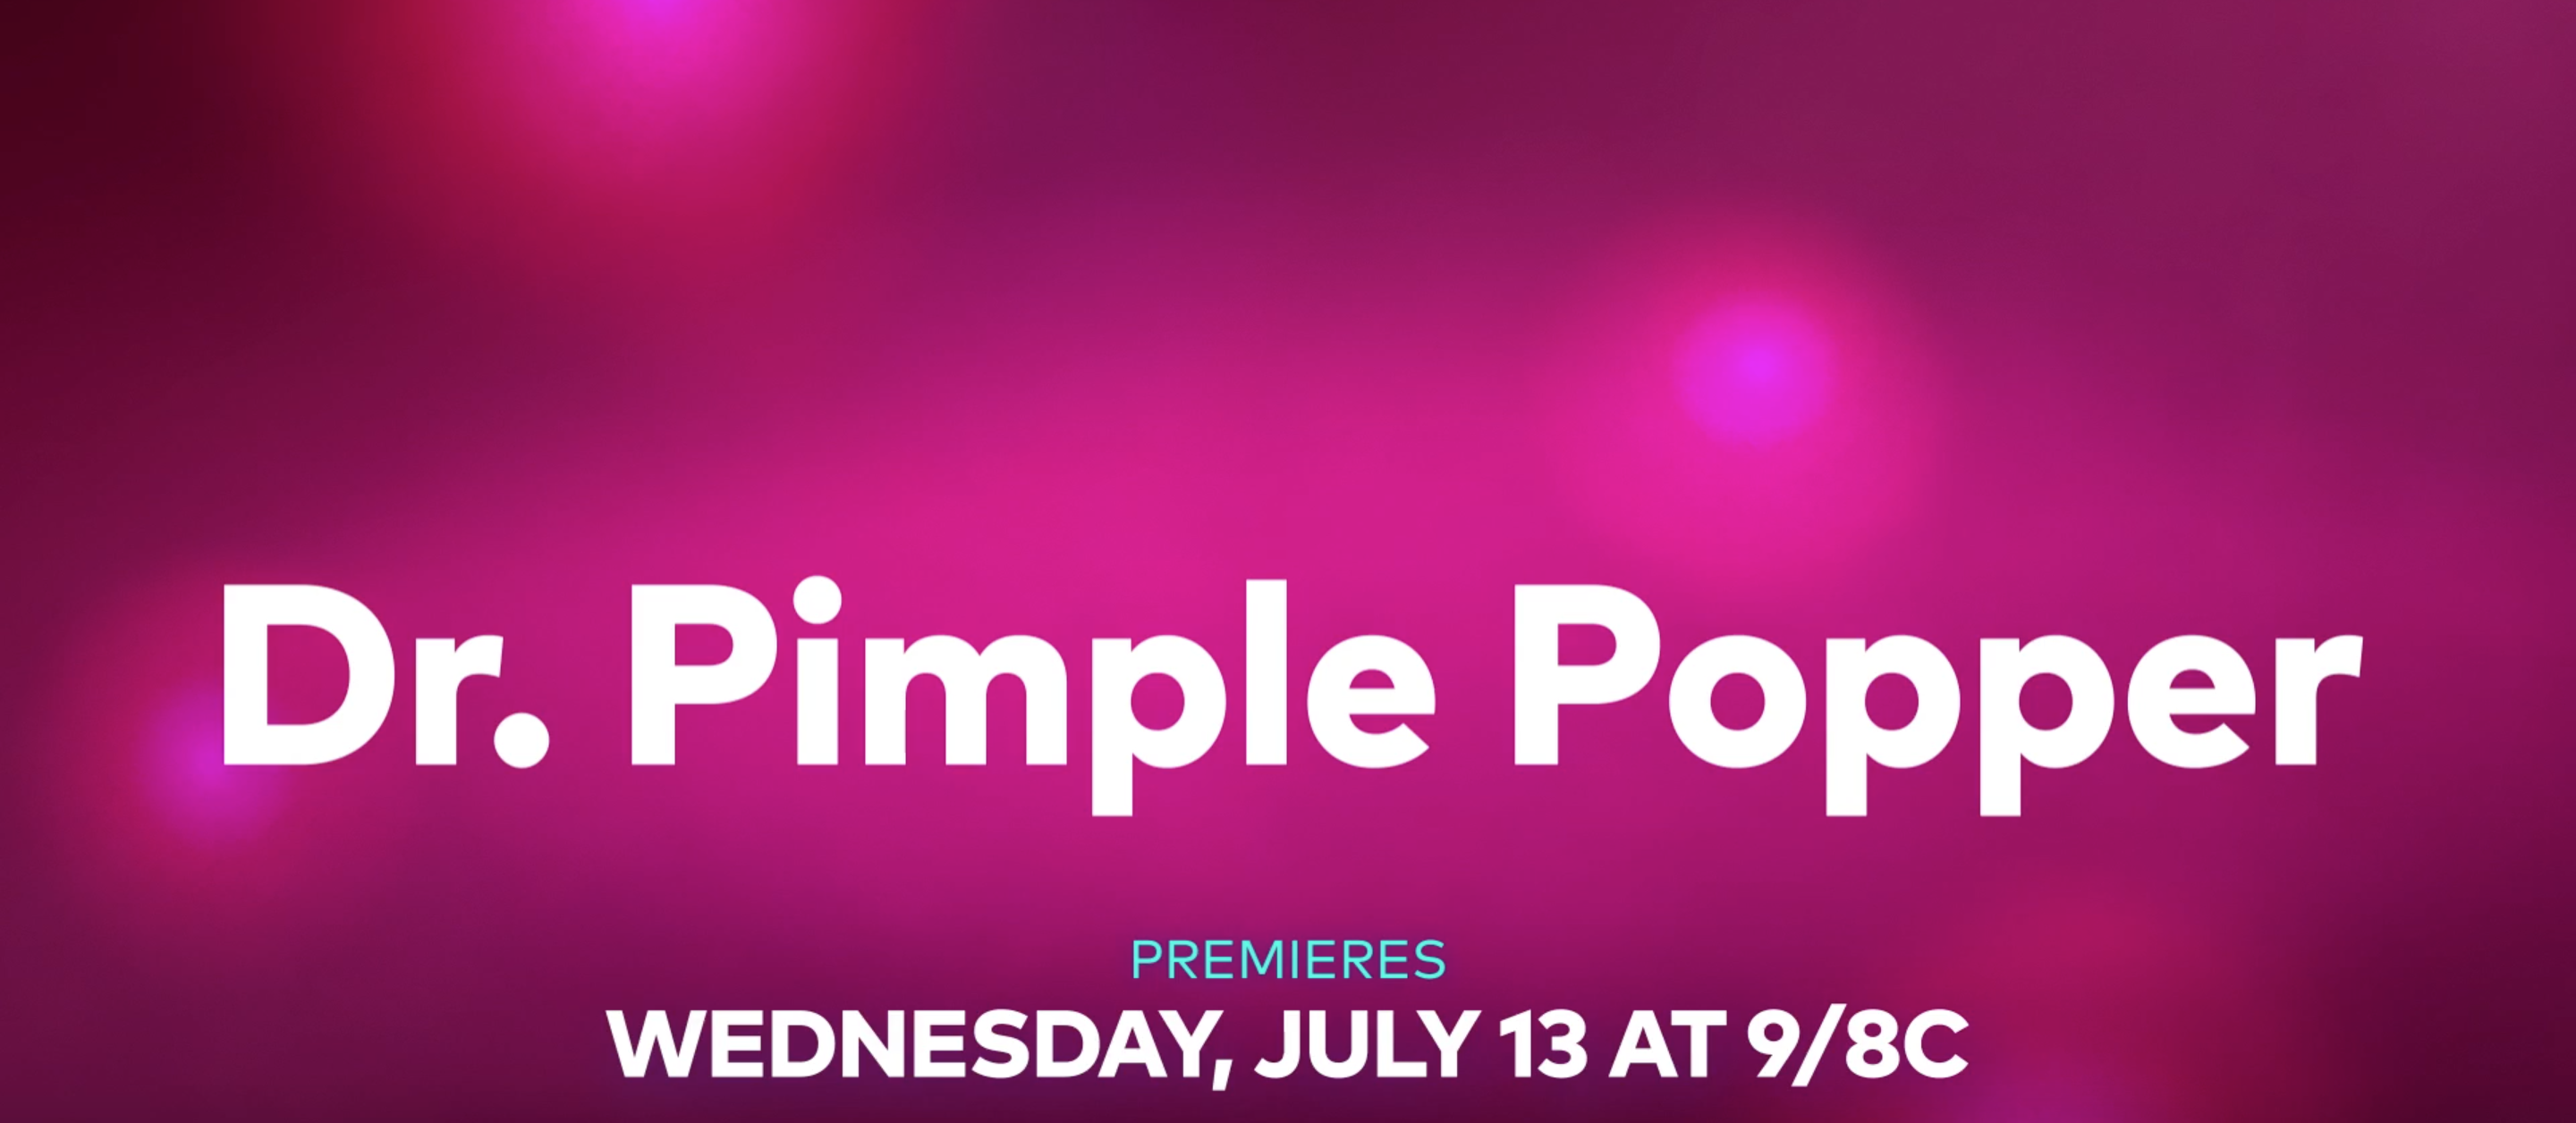 Ups honning opnå How to watch 'Dr. Pimple Popper': New season time, TV channel, live stream,  - syracuse.com